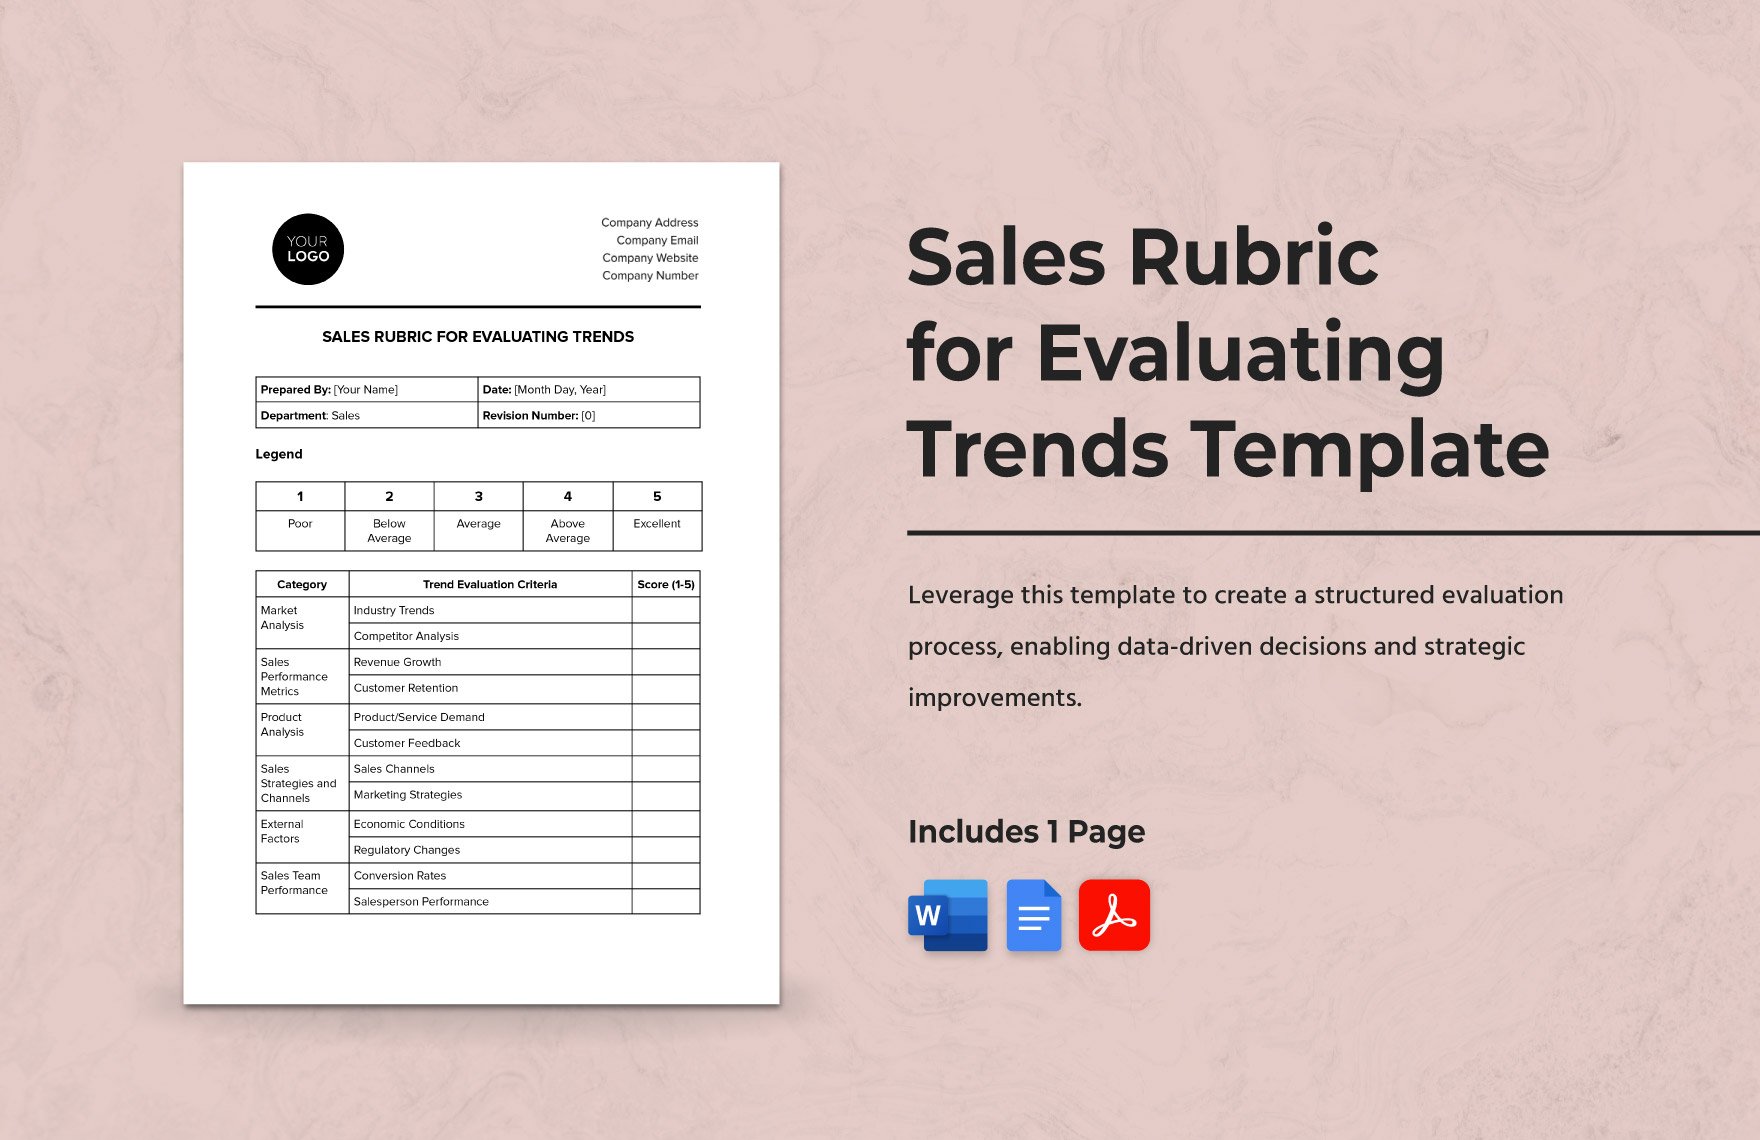 Sales Rubric for Evaluating Trends Template in Word, Google Docs, PDF